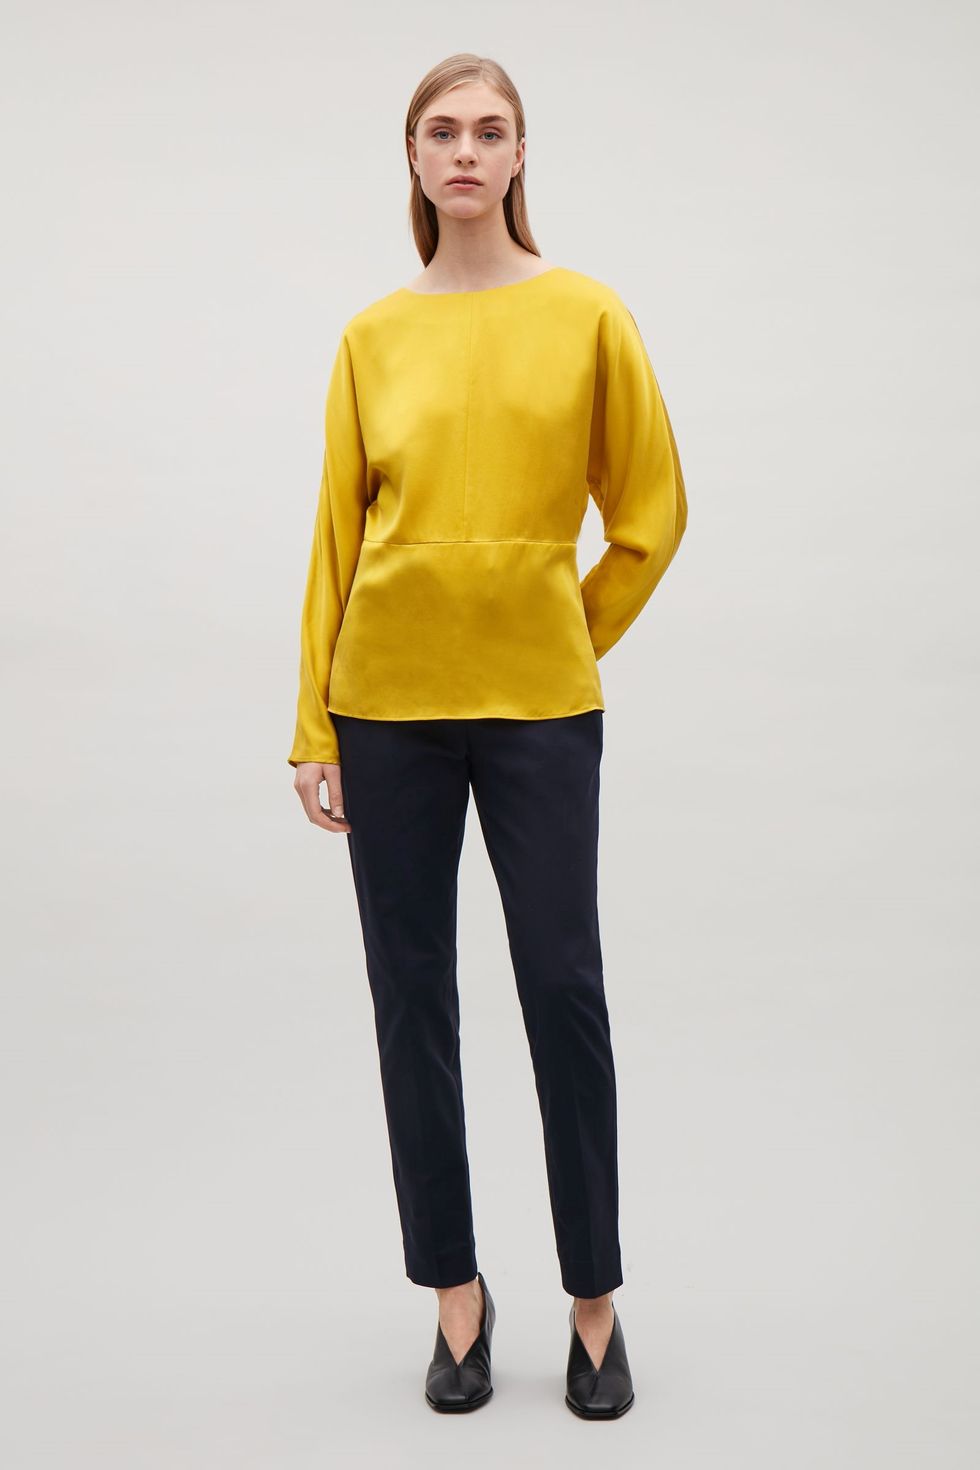 Clothing, Yellow, Neck, Shoulder, Sleeve, Blouse, Standing, Fashion, Joint, Top, 